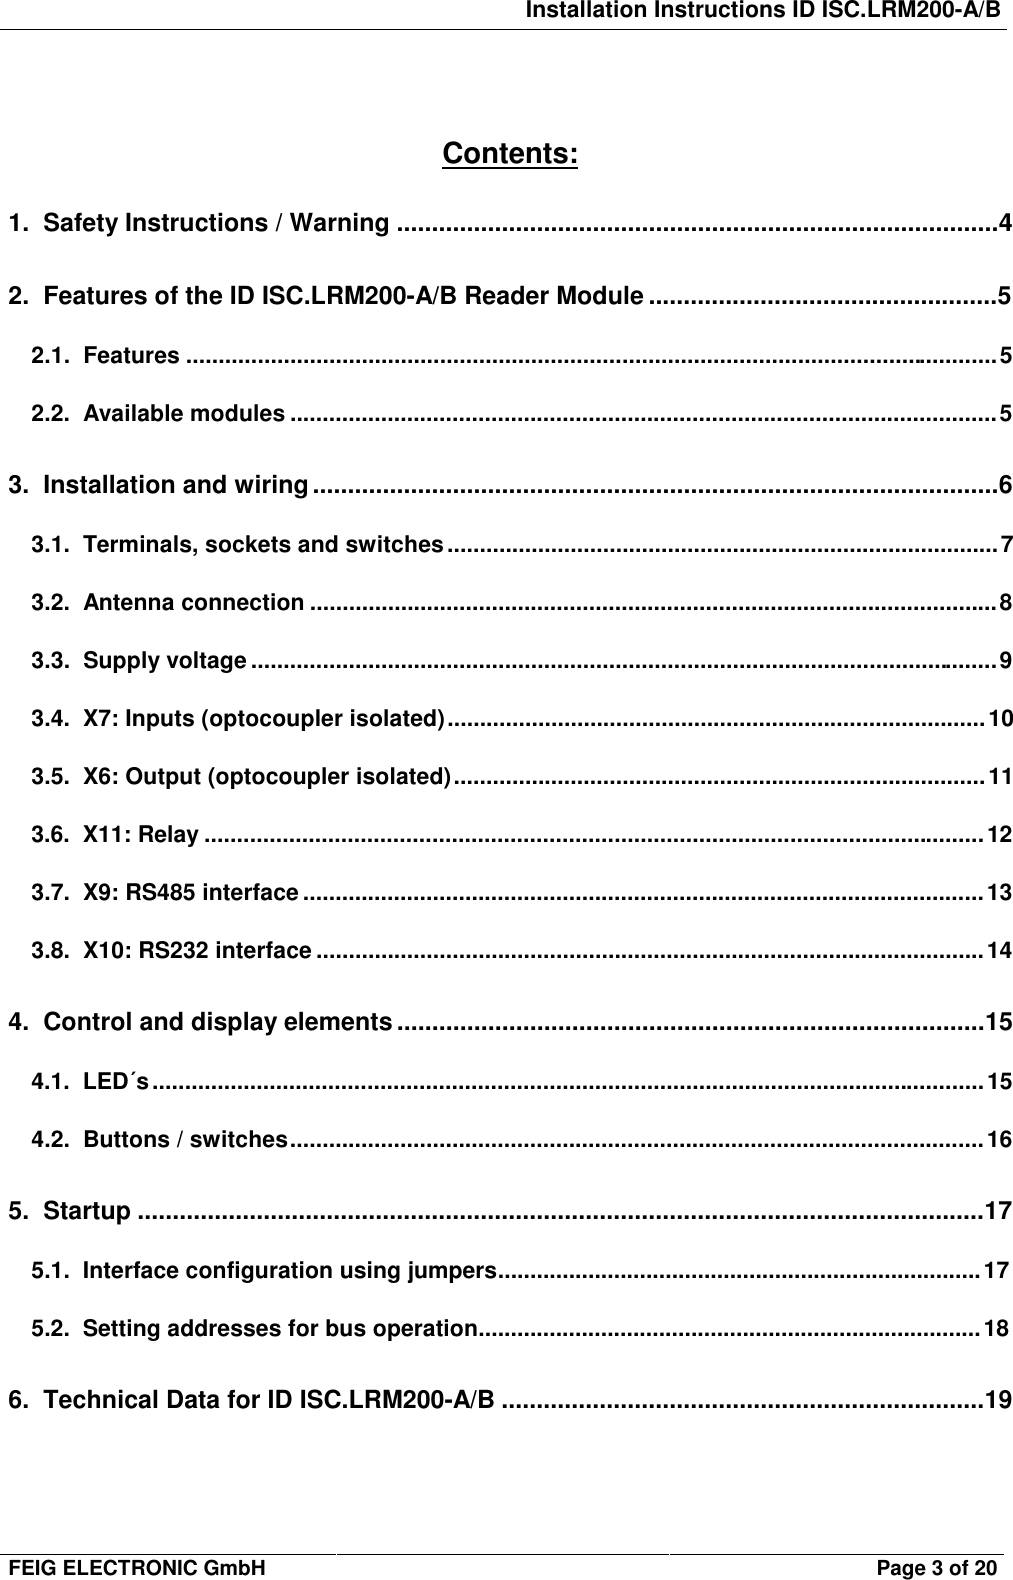 Installation Instructions ID ISC.LRM200-A/BFEIG ELECTRONIC GmbH Page 3 of 20Contents:1.  Safety Instructions / Warning ......................................................................................42.  Features of the ID ISC.LRM200-A/B Reader Module ..................................................52.1.  Features .............................................................................................................................52.2.  Available modules .............................................................................................................53.  Installation and wiring ..................................................................................................63.1.  Terminals, sockets and switches.....................................................................................73.2.  Antenna connection ..........................................................................................................83.3.  Supply voltage ...................................................................................................................93.4.  X7: Inputs (optocoupler isolated)...................................................................................103.5.  X6: Output (optocoupler isolated)..................................................................................113.6.  X11: Relay ........................................................................................................................123.7.  X9: RS485 interface .........................................................................................................133.8.  X10: RS232 interface .......................................................................................................144.  Control and display elements ....................................................................................154.1.  LED´s................................................................................................................................154.2.  Buttons / switches...........................................................................................................165.  Startup .........................................................................................................................175.1.  Interface configuration using jumpers...........................................................................175.2.  Setting addresses for bus operation..............................................................................186.  Technical Data for ID ISC.LRM200-A/B .....................................................................19